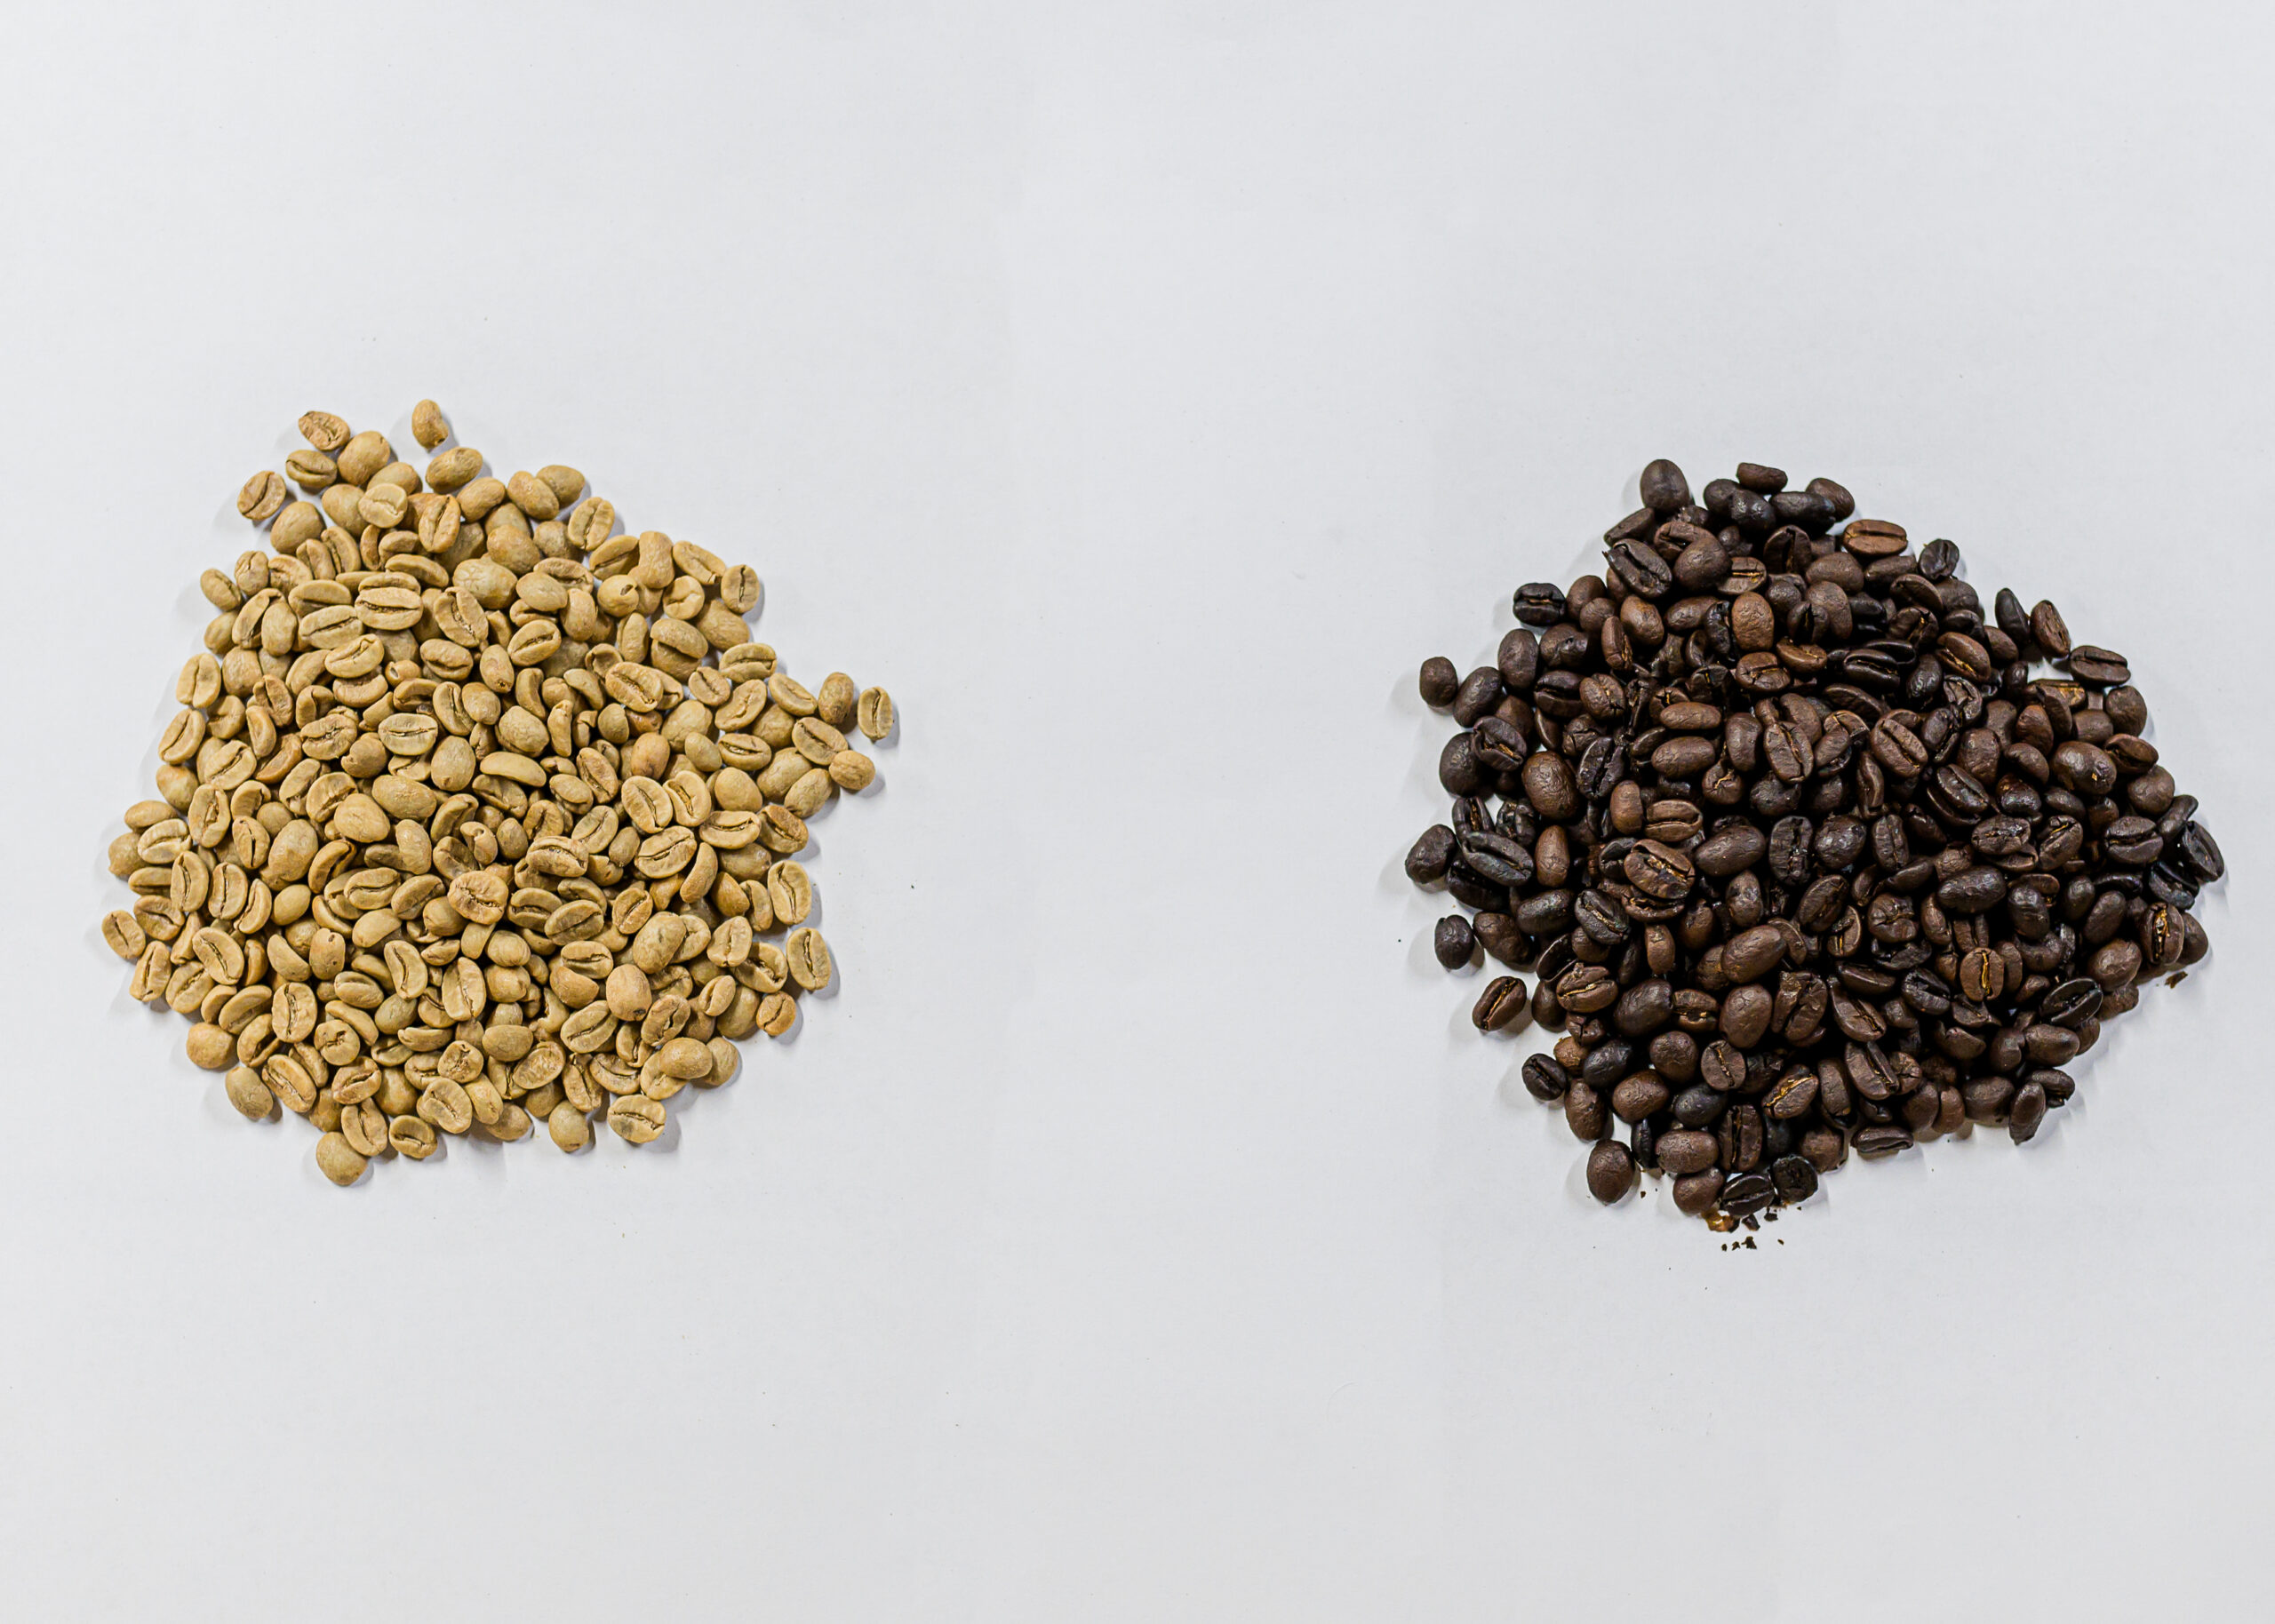 Coffee beans before and after being roasted